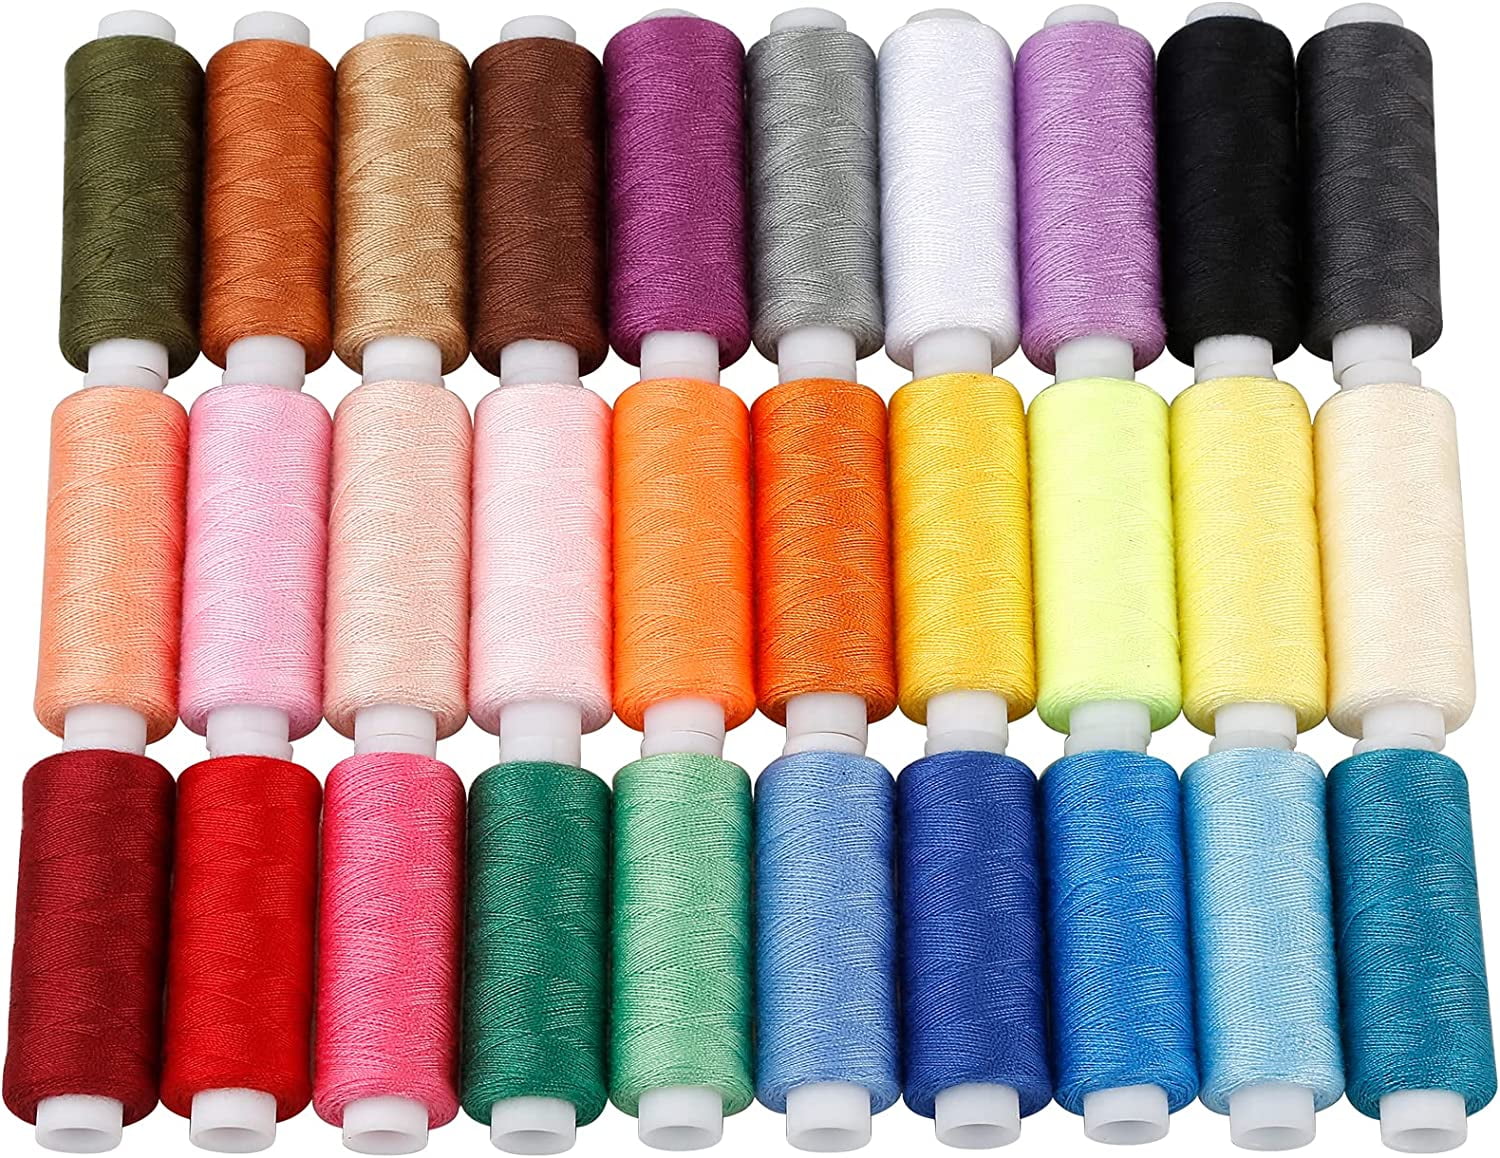  Mega Kit 260 Spools Polyester Embroidery Machine Thread : Arts,  Crafts & Sewing